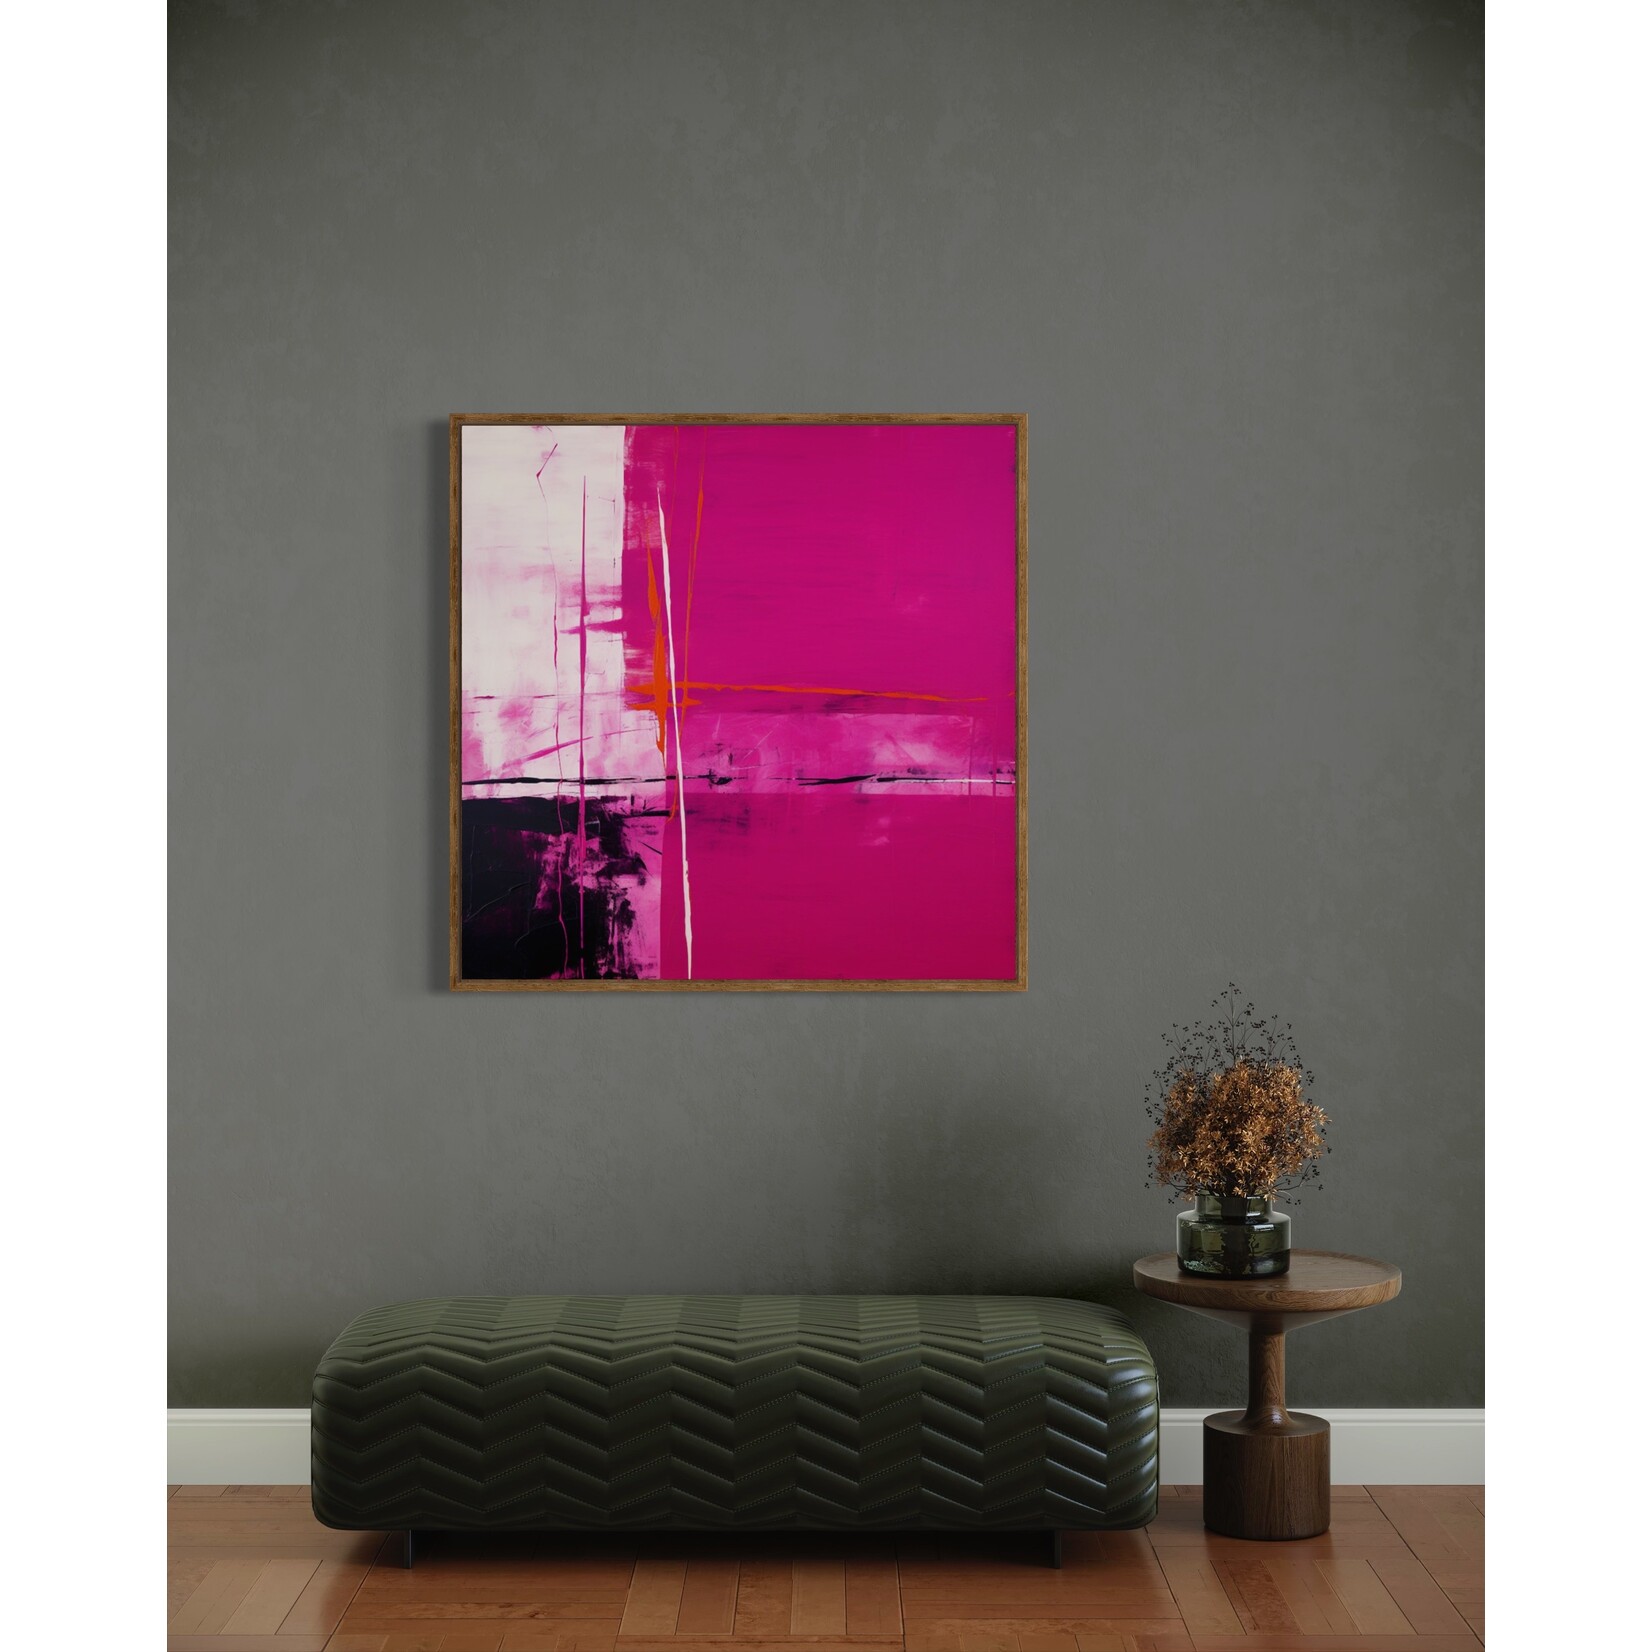 Stretched Print on Canvas Spirit Desire by Al Bayina